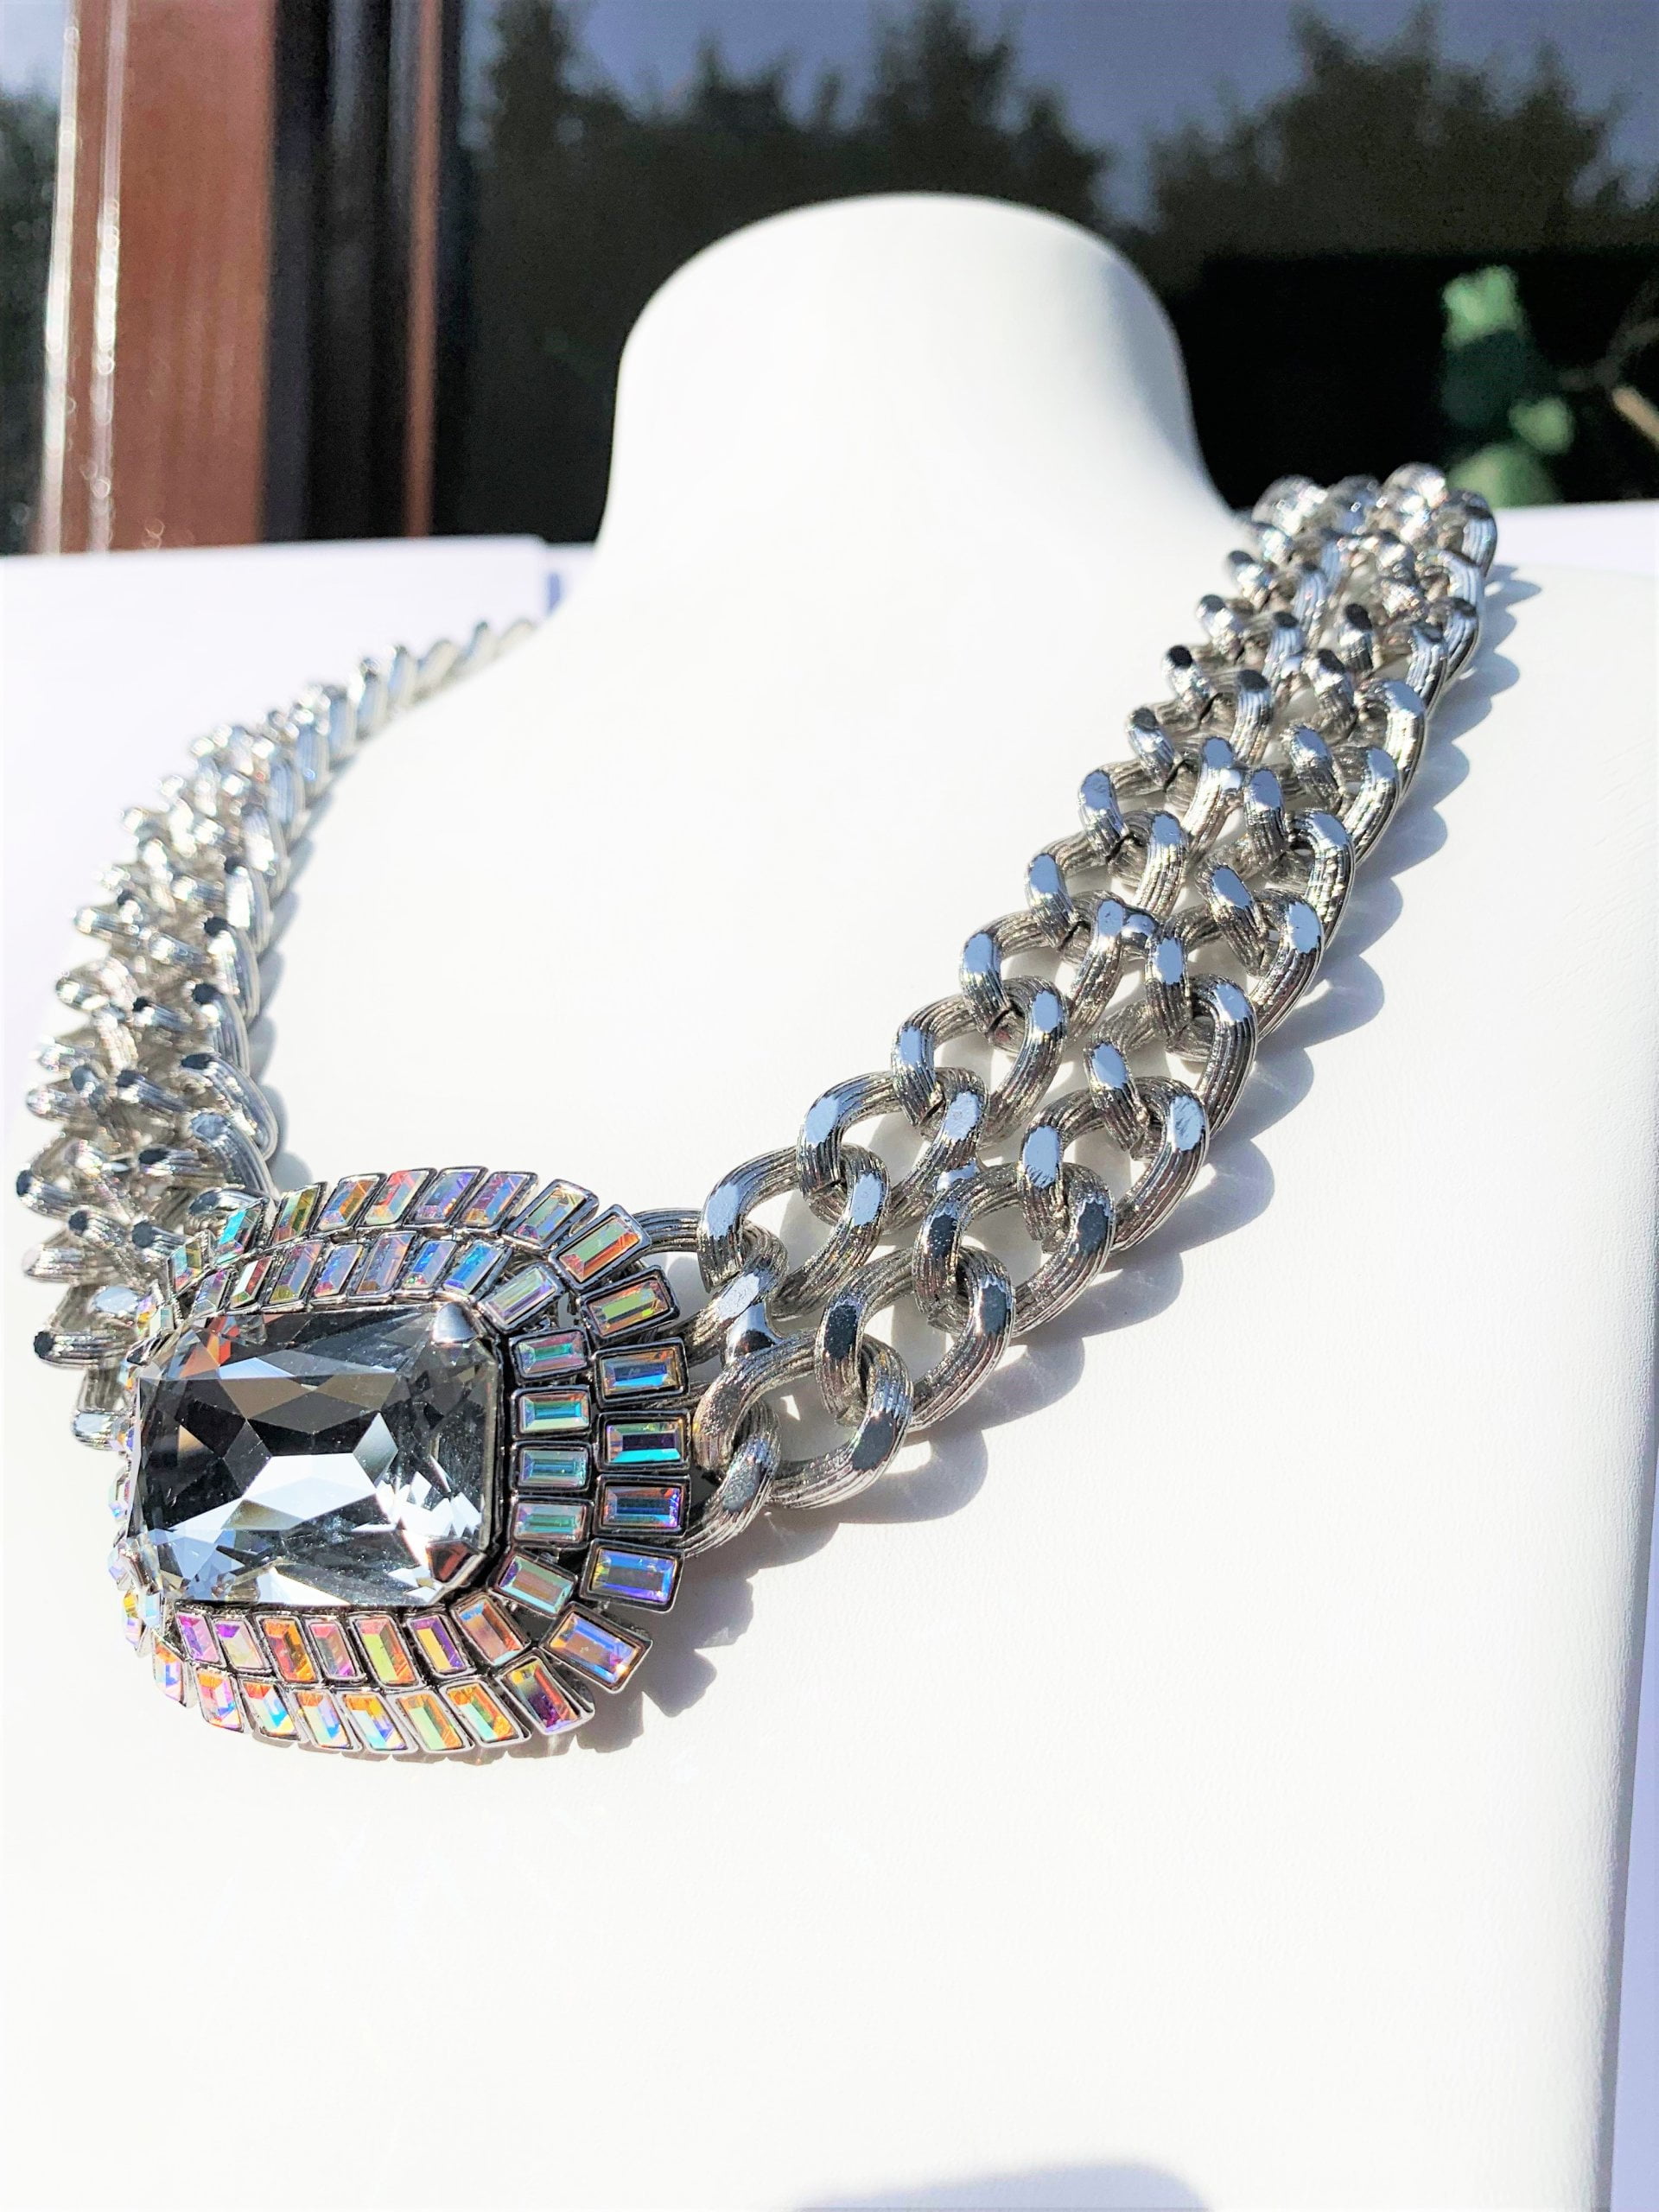 Facetted crystal chainlink necklace